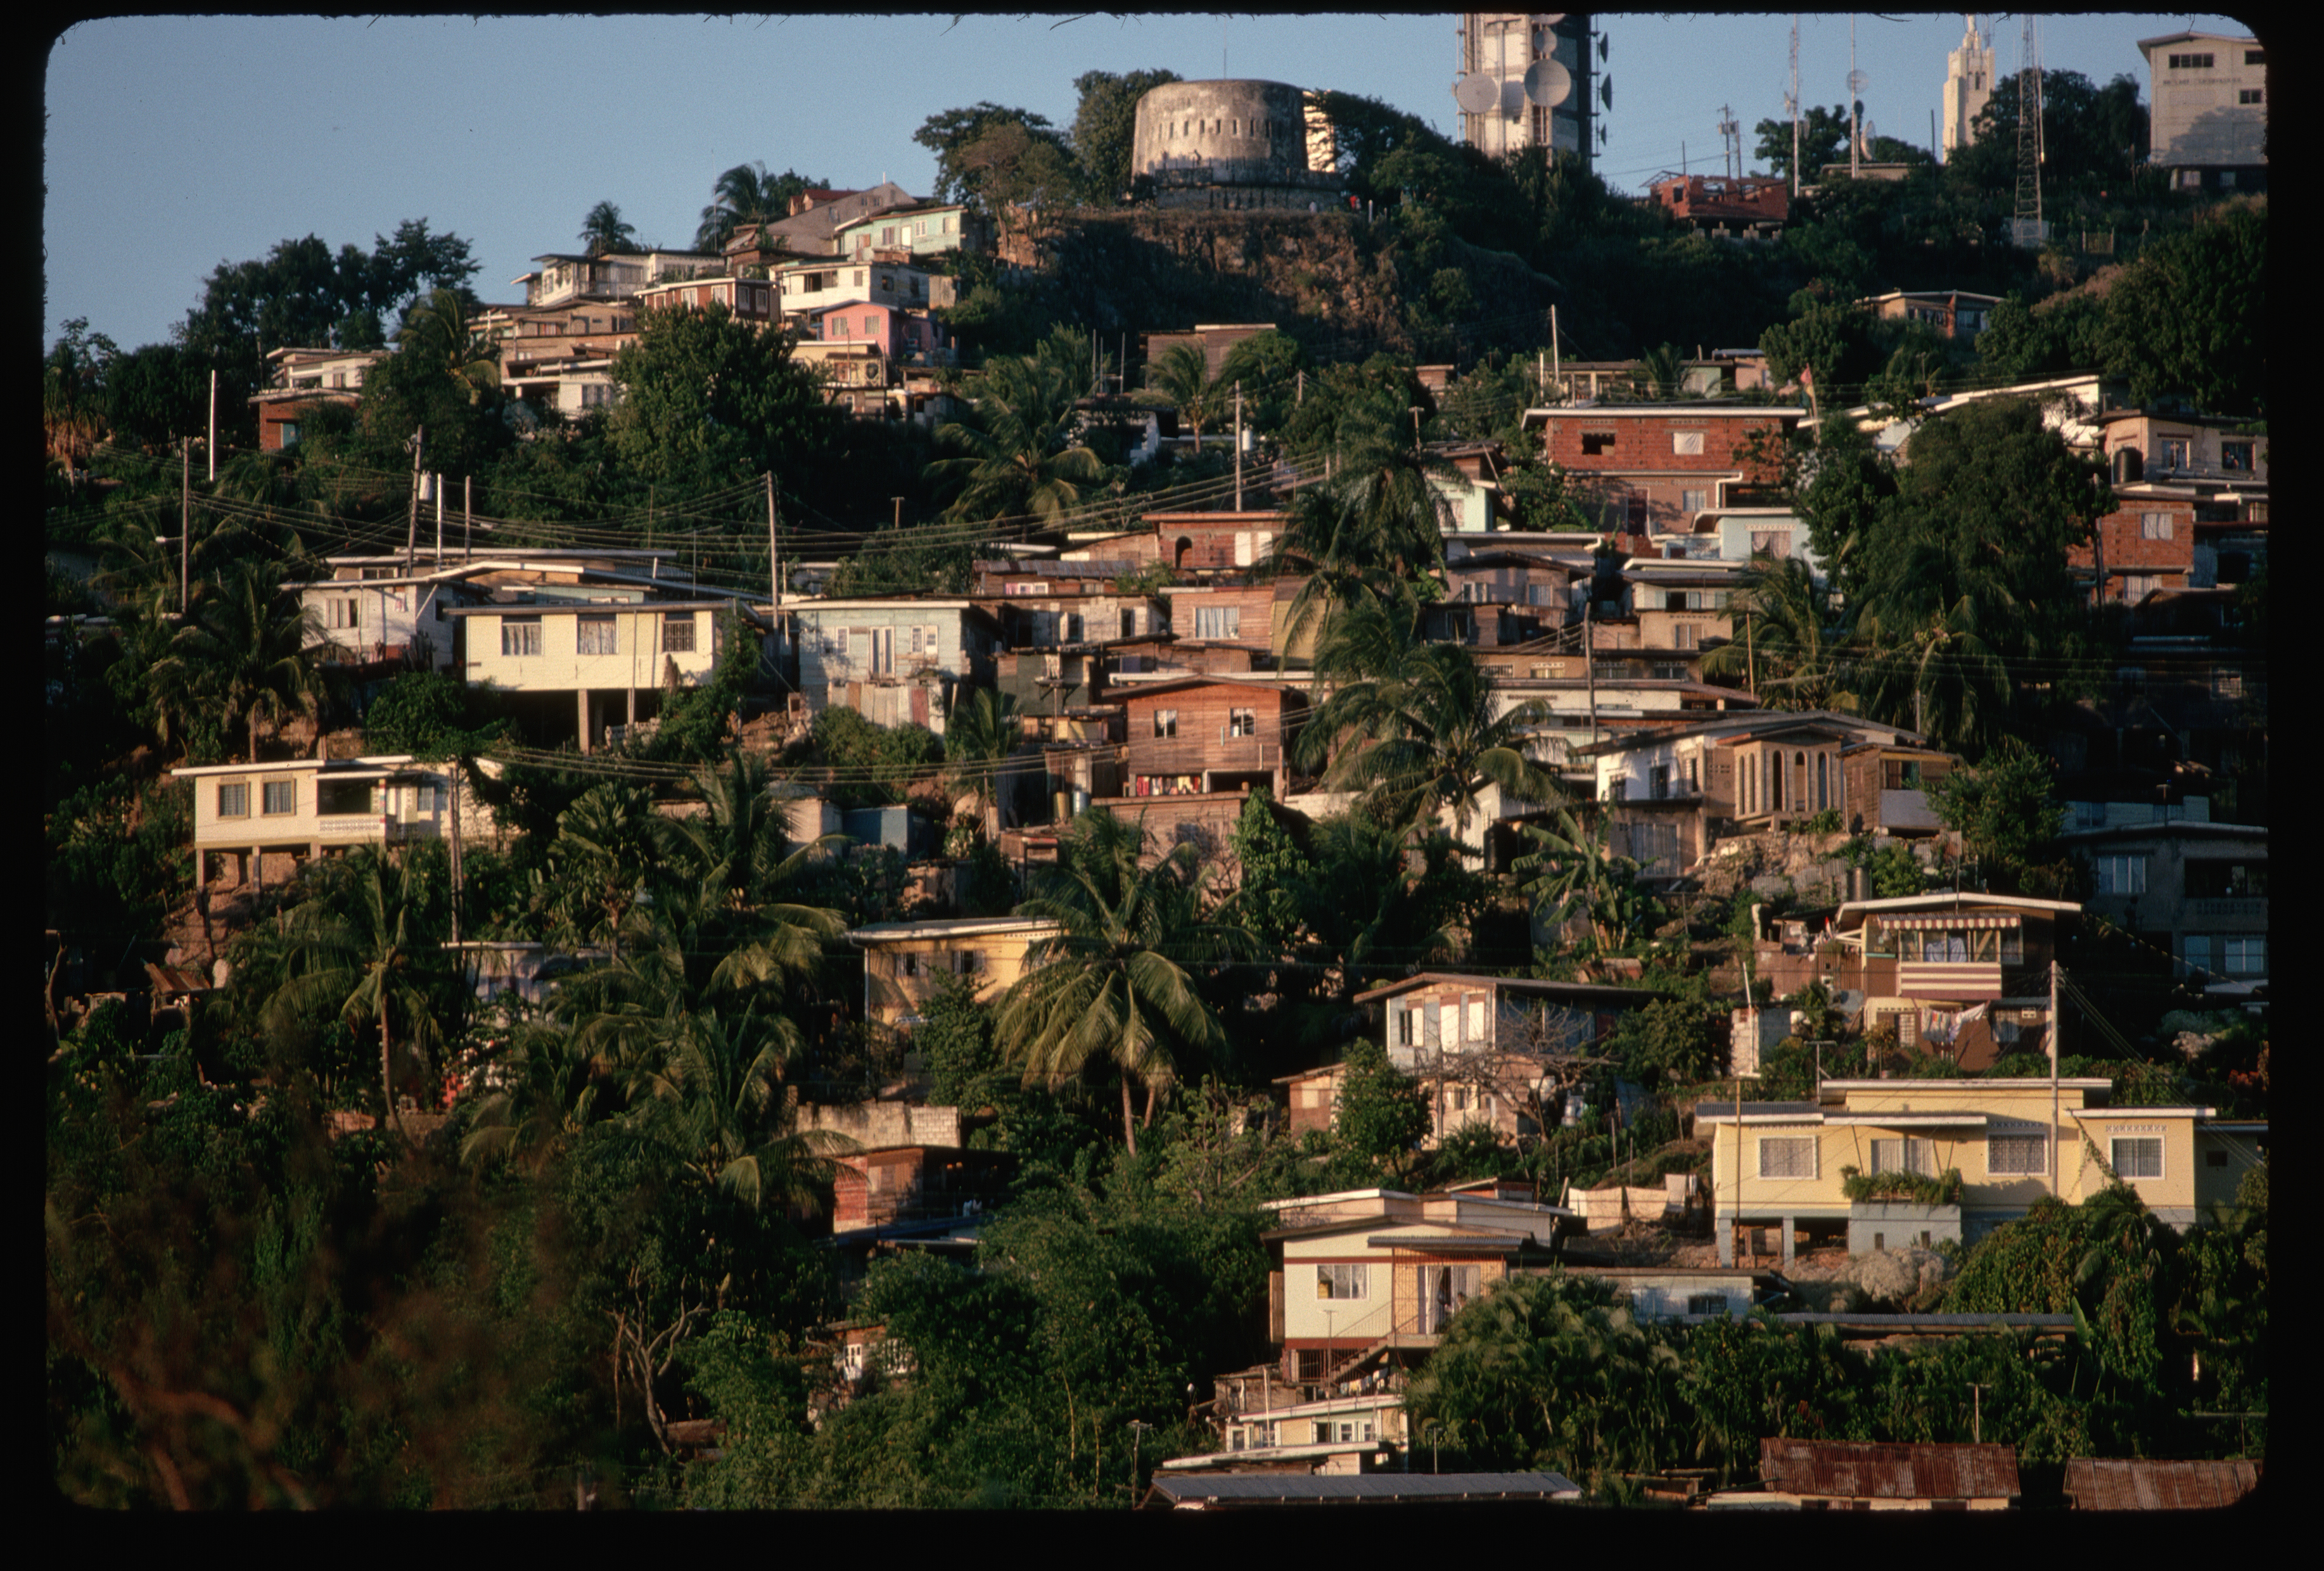 Hillside with dense cluster of houses and vegetation, with a large monument visible in the background